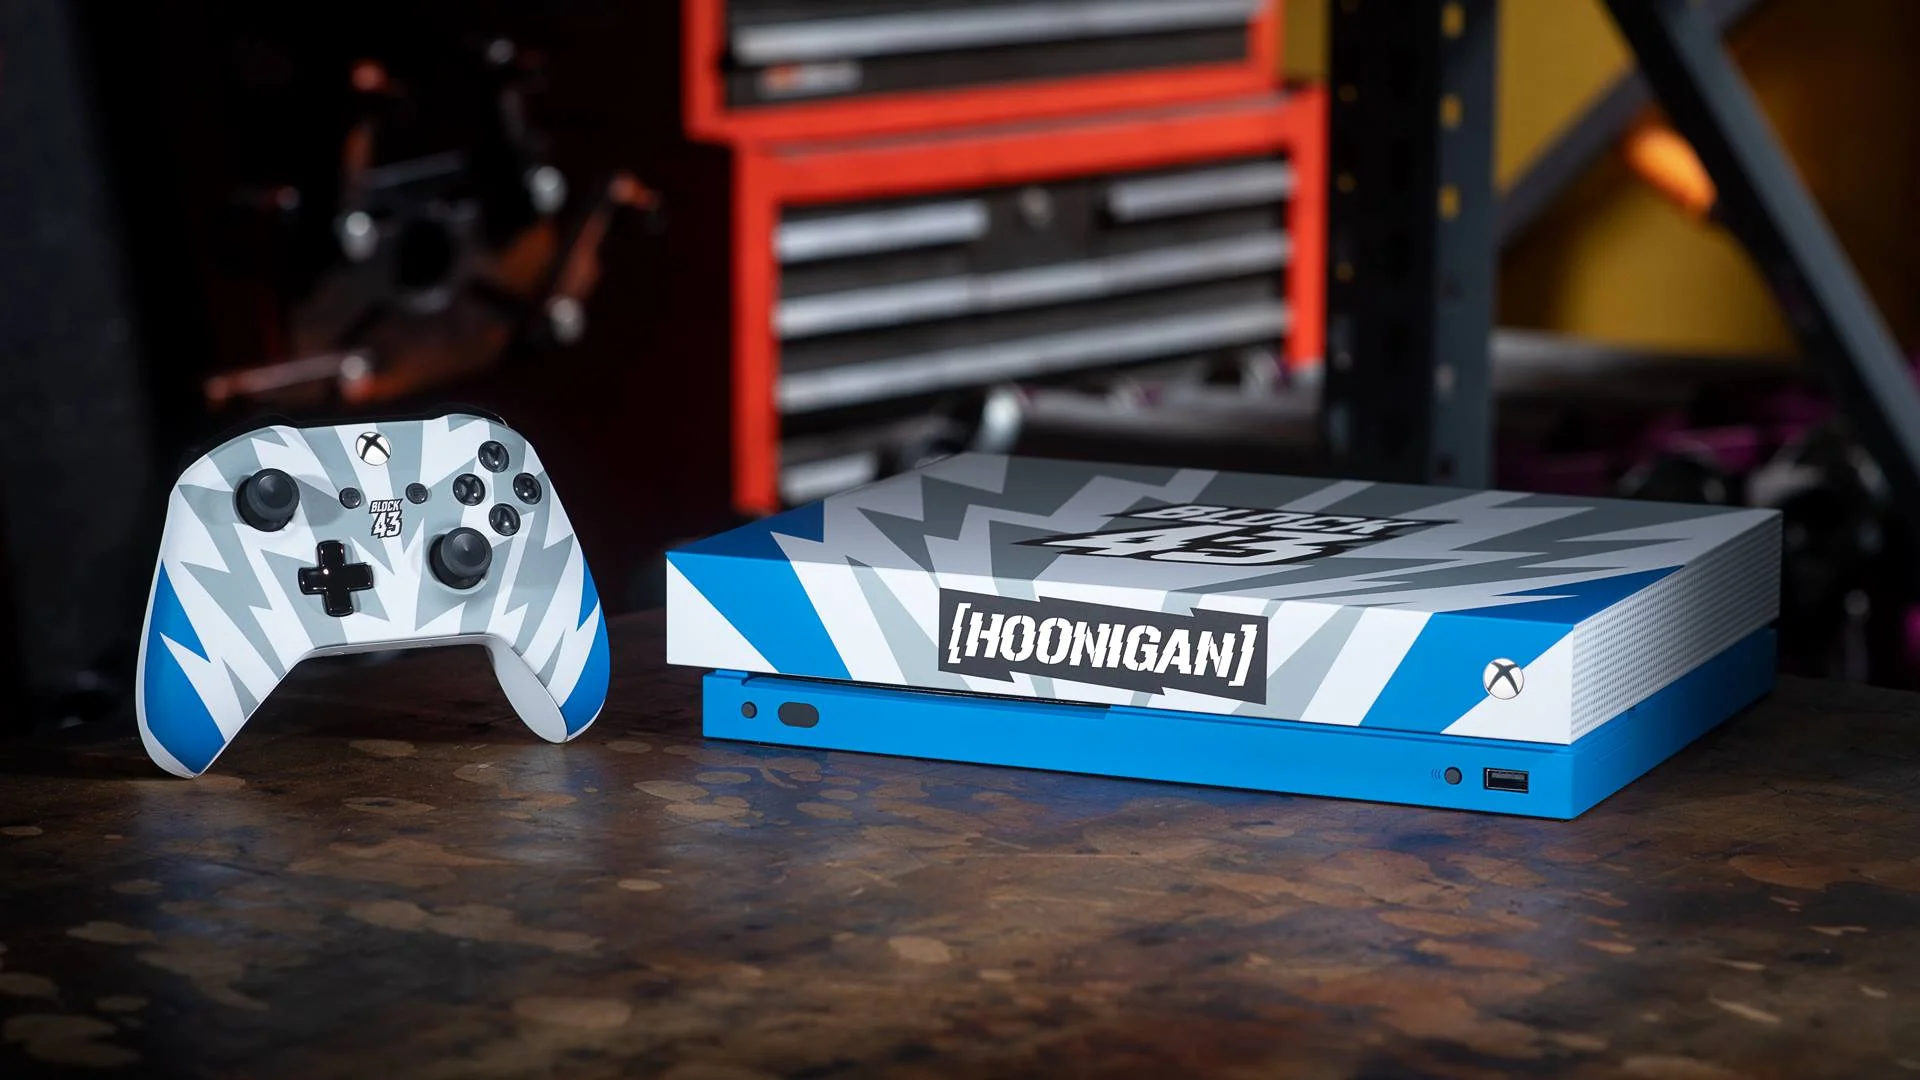  Microsoft Xbox One X Hoonigan Block 43 White and Blue Console